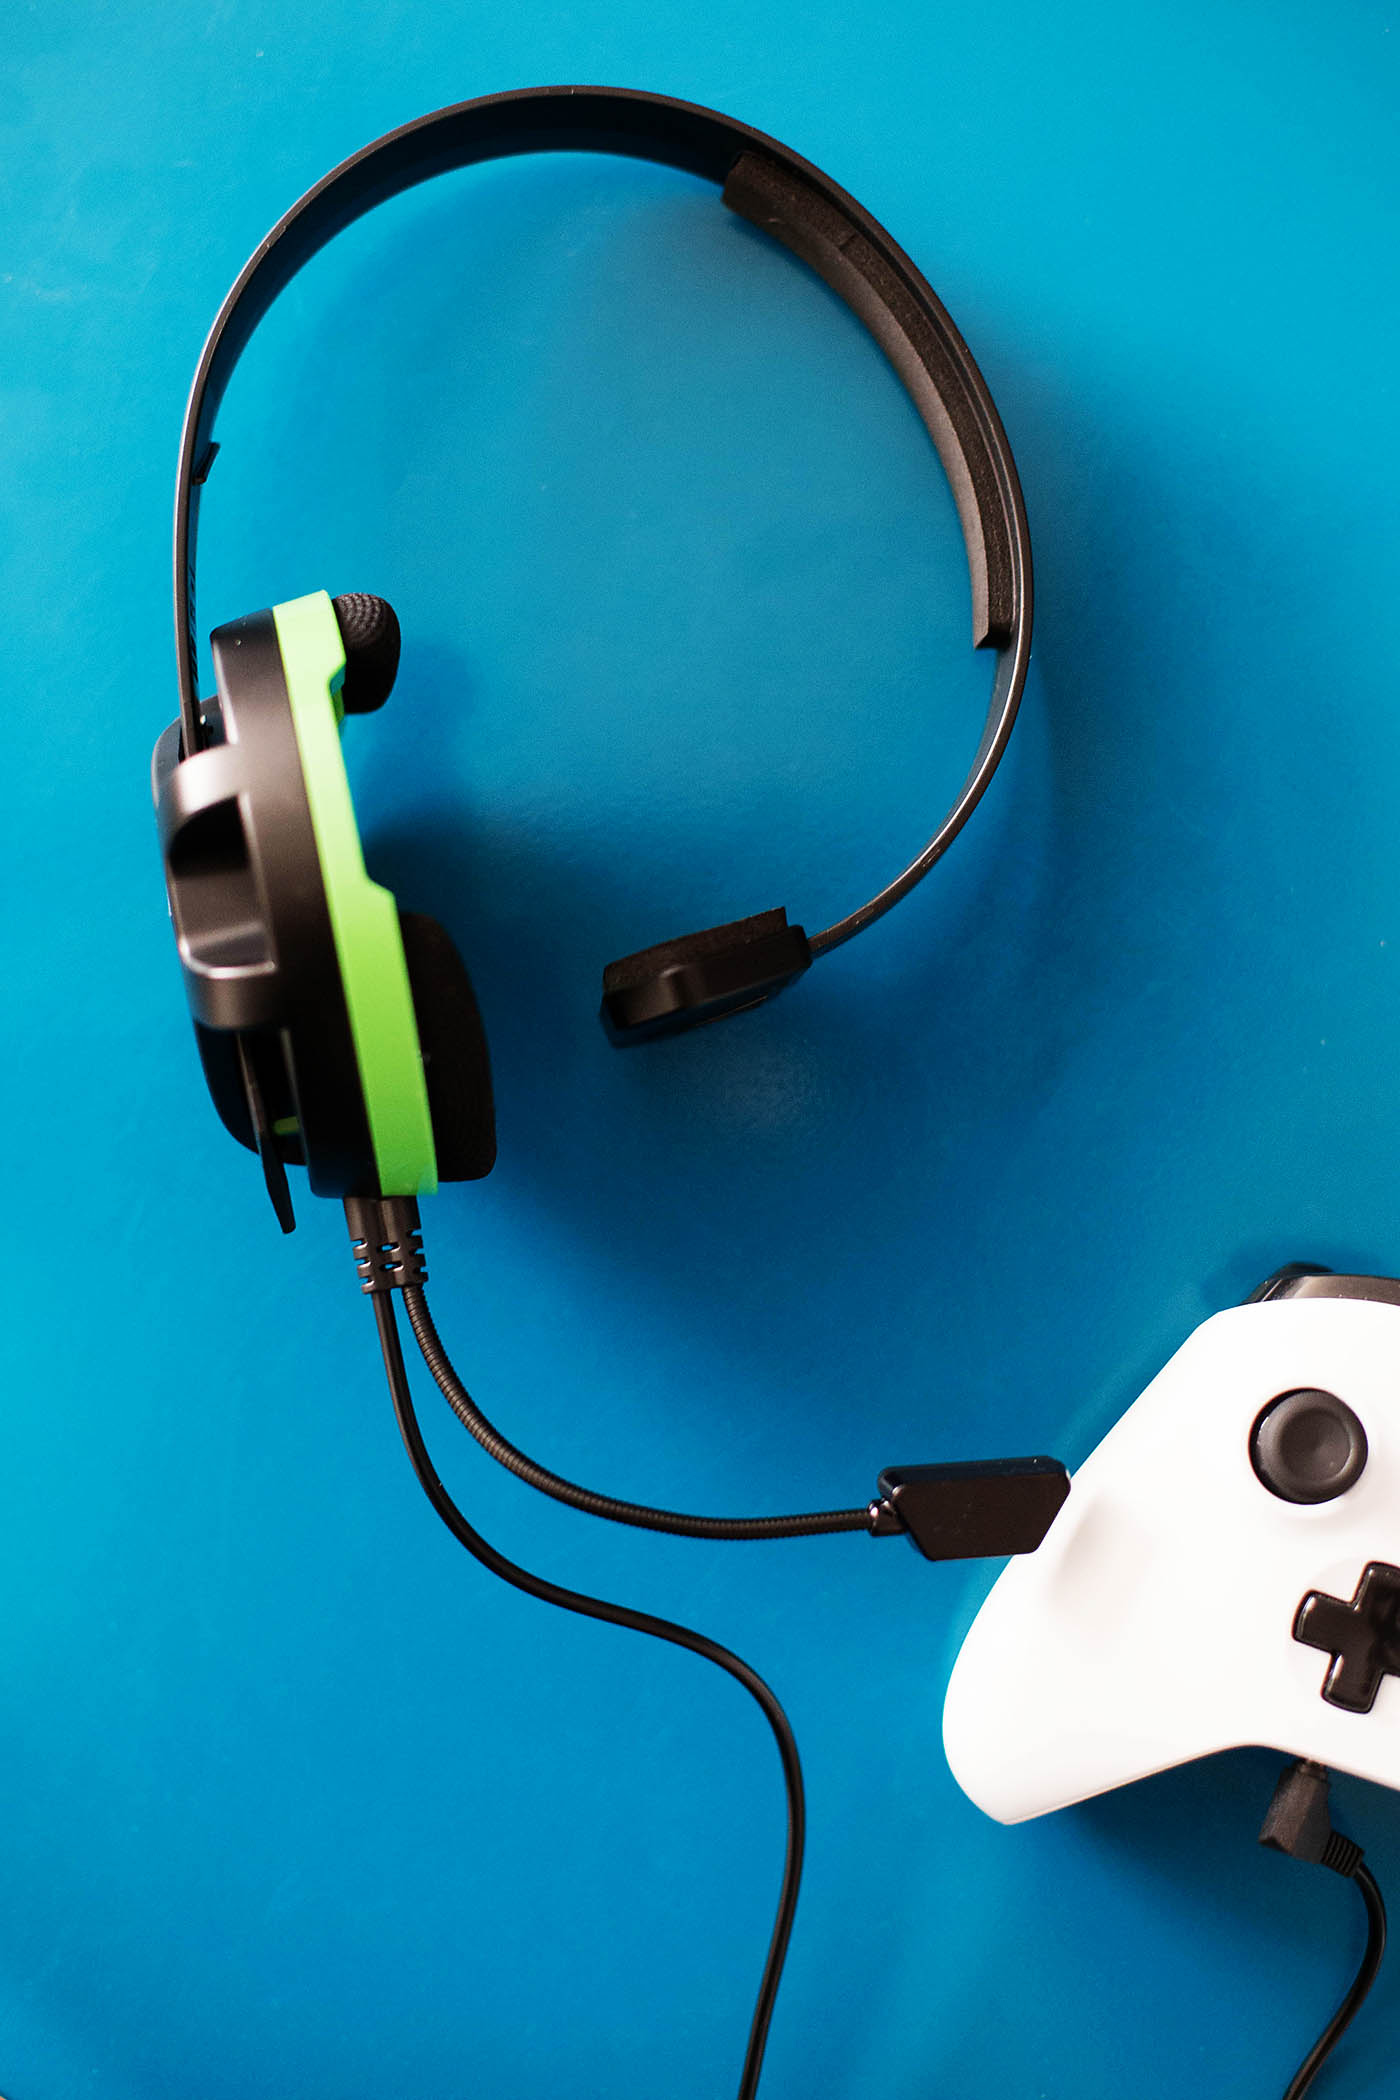 Recon Chat Headset - Xbox